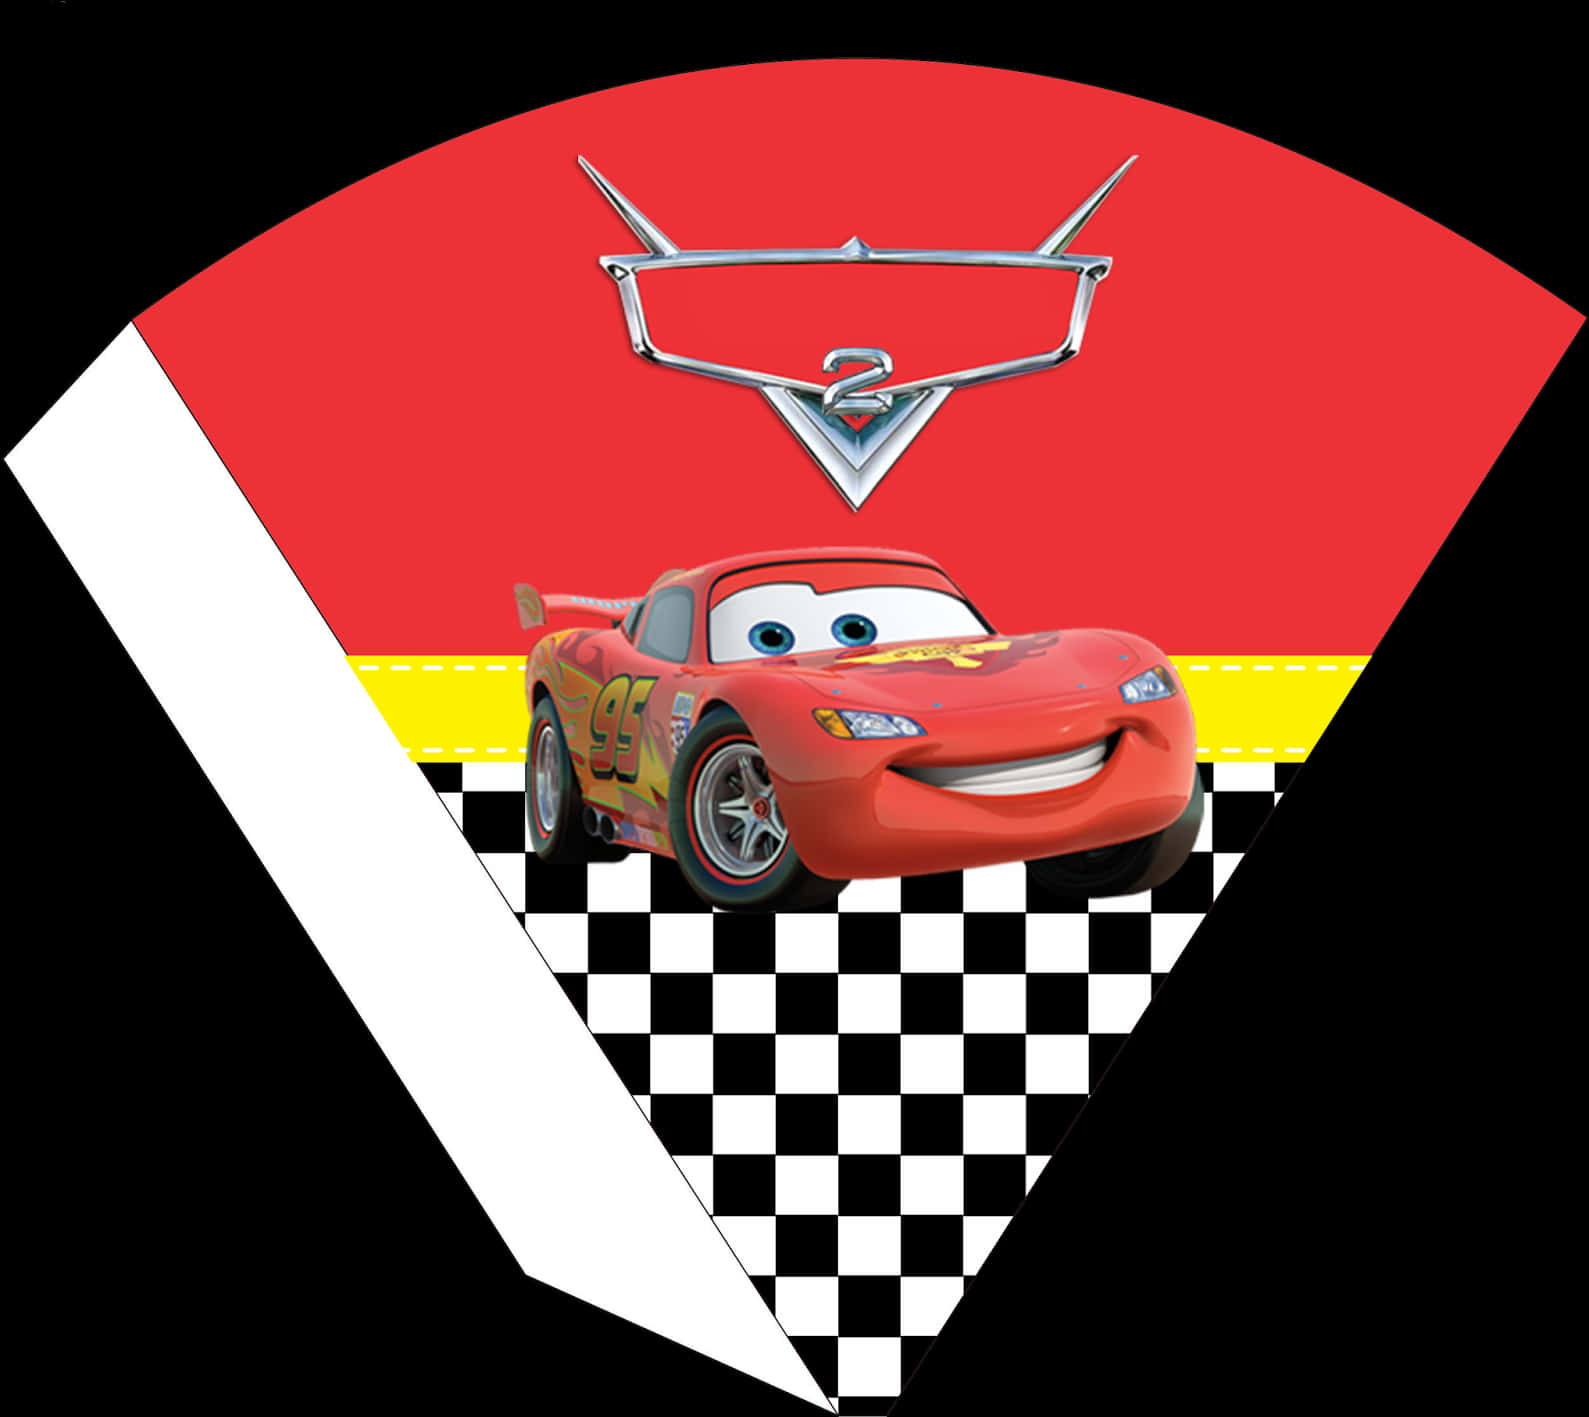 A Cartoon Car On A Black And White Background